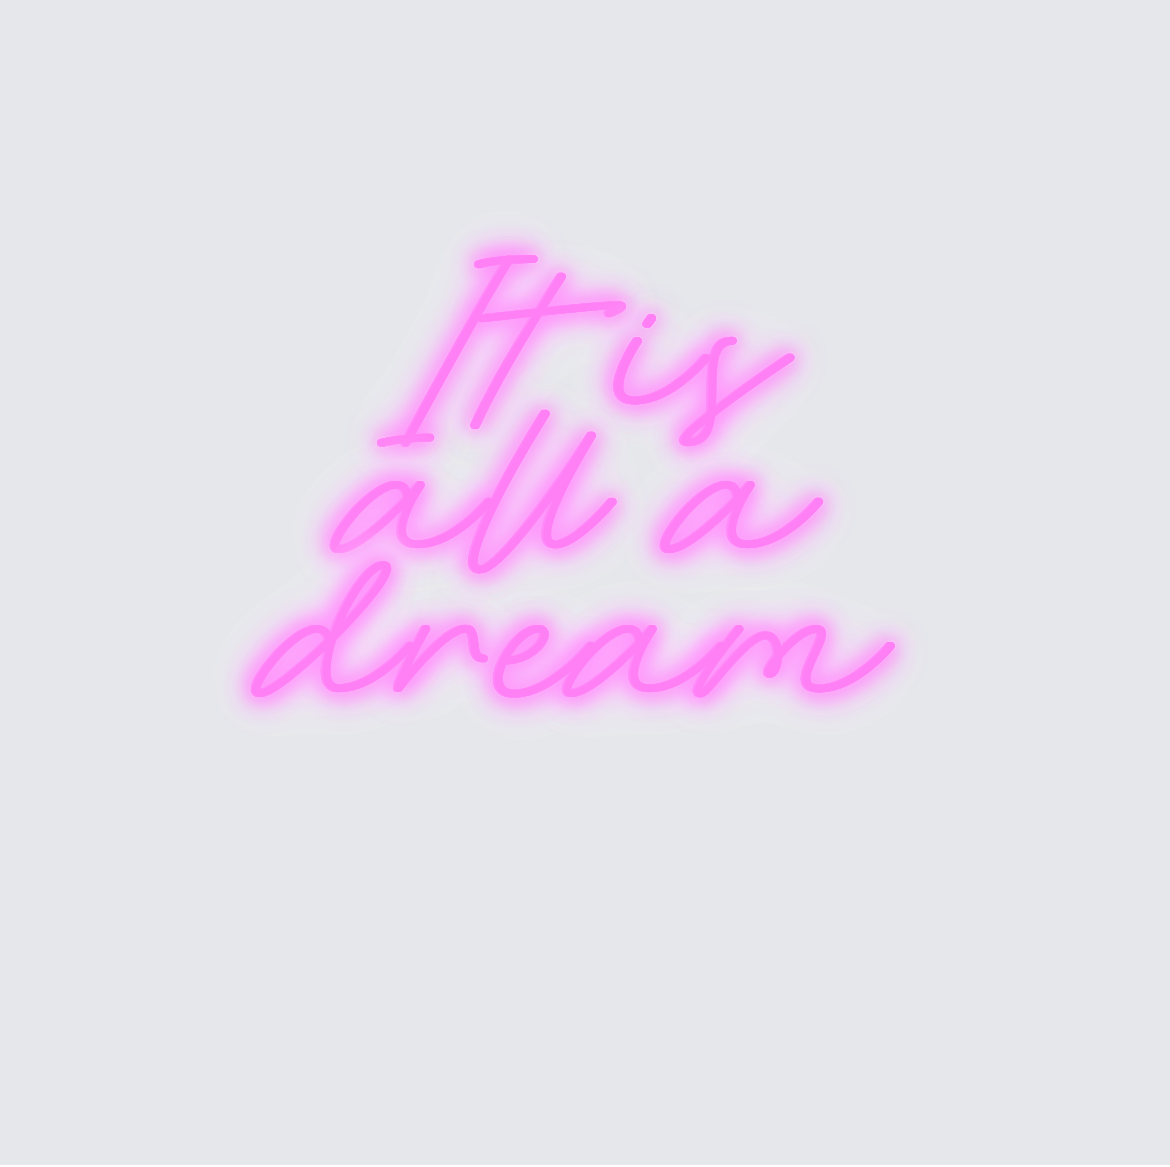 Custom neon sign - It is all a dream